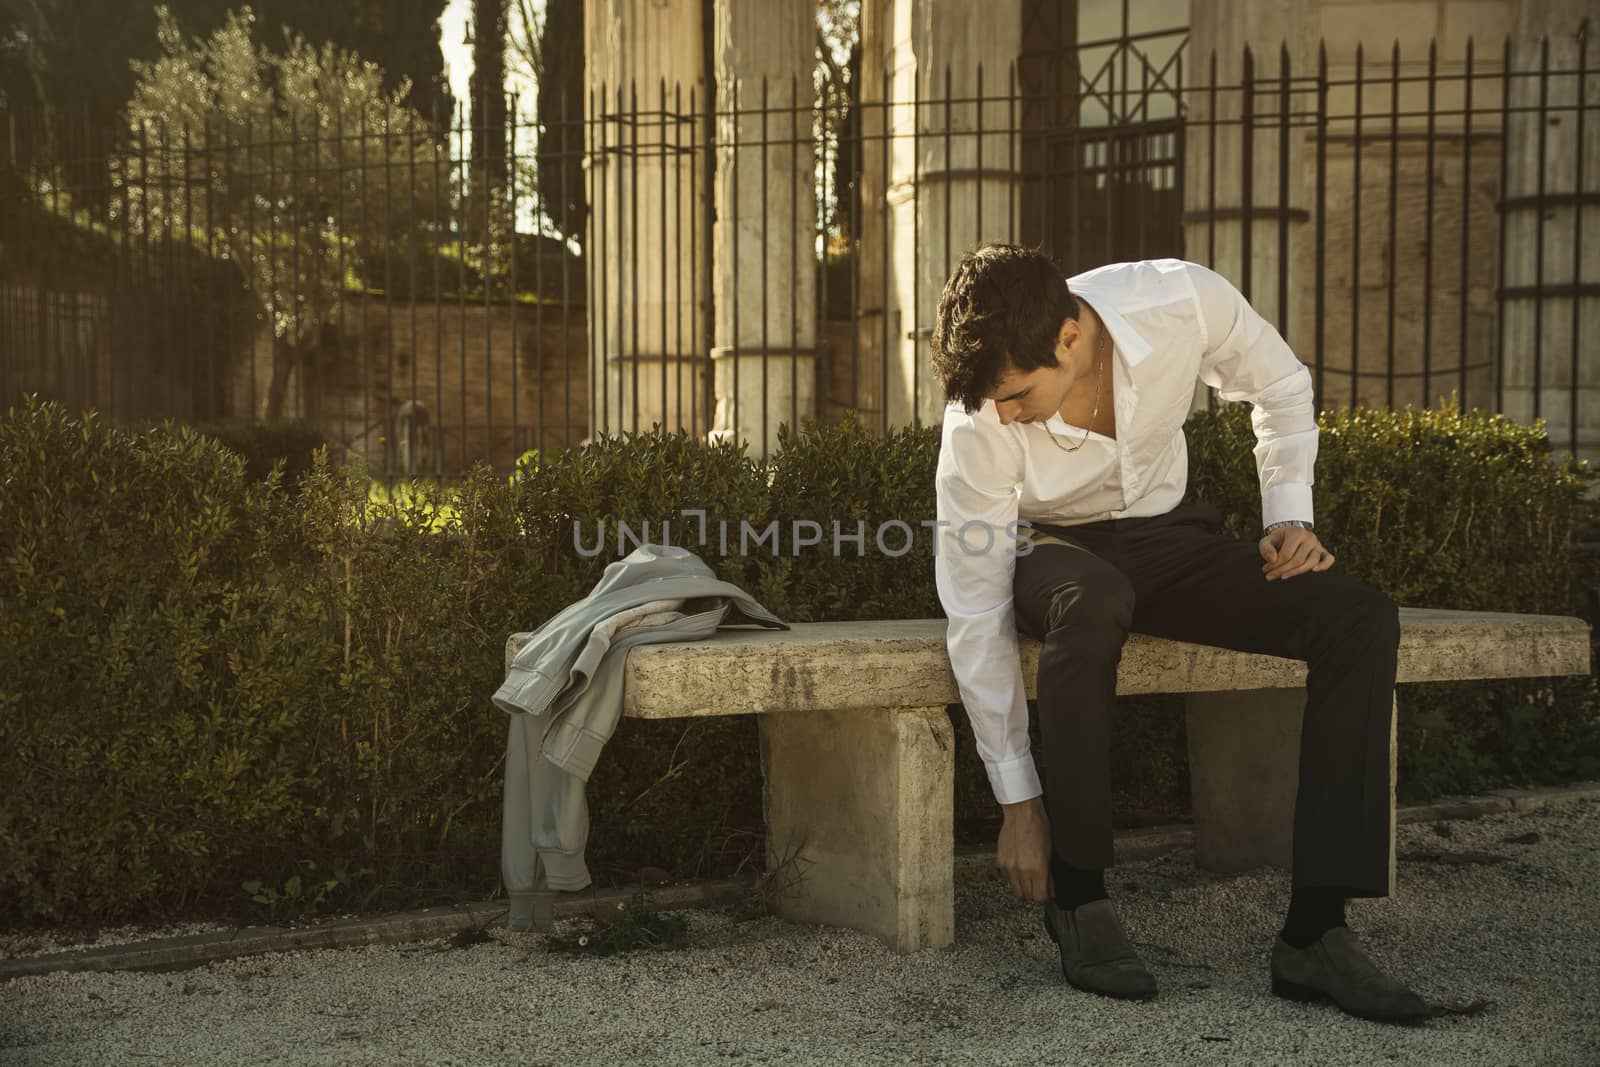 Handsome young man in European city, sitting on stone bench, adjusting a shoe